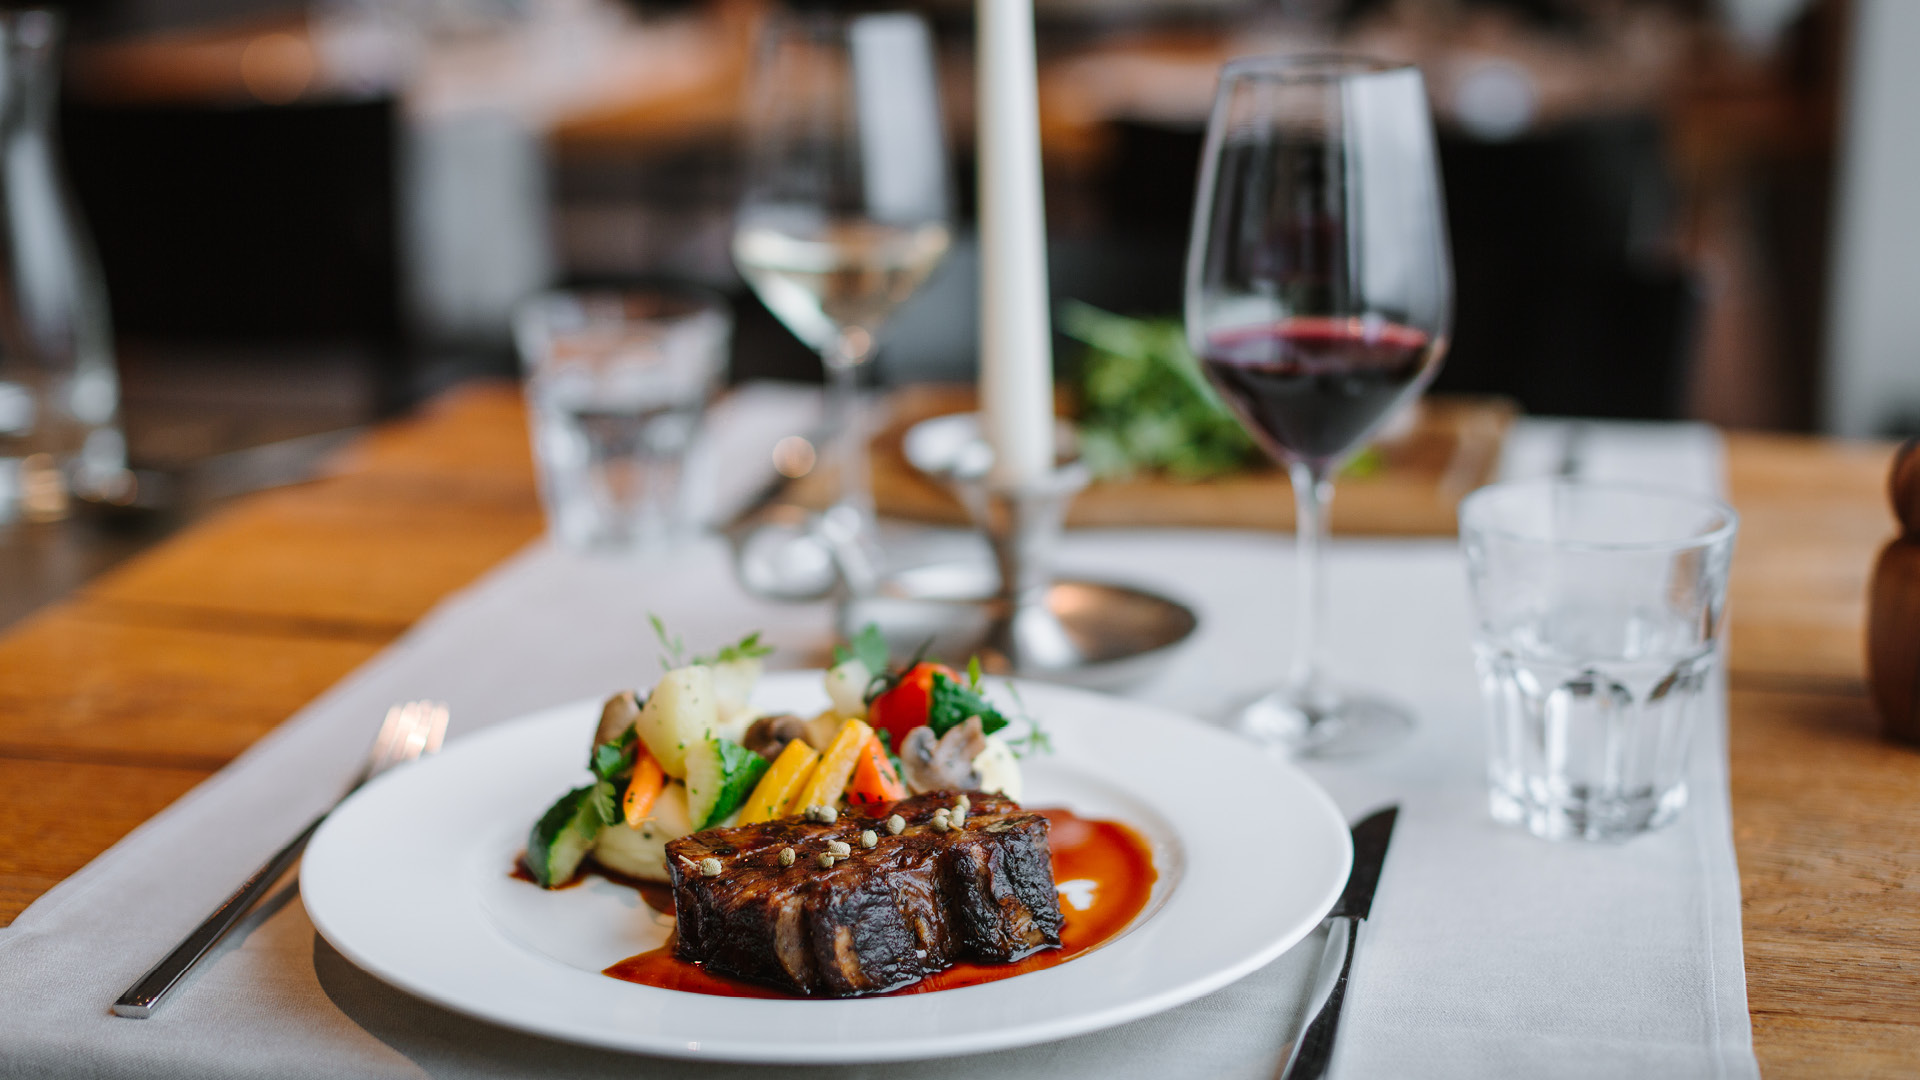 24-hour braised beef rib with vegetables and a glass of wine